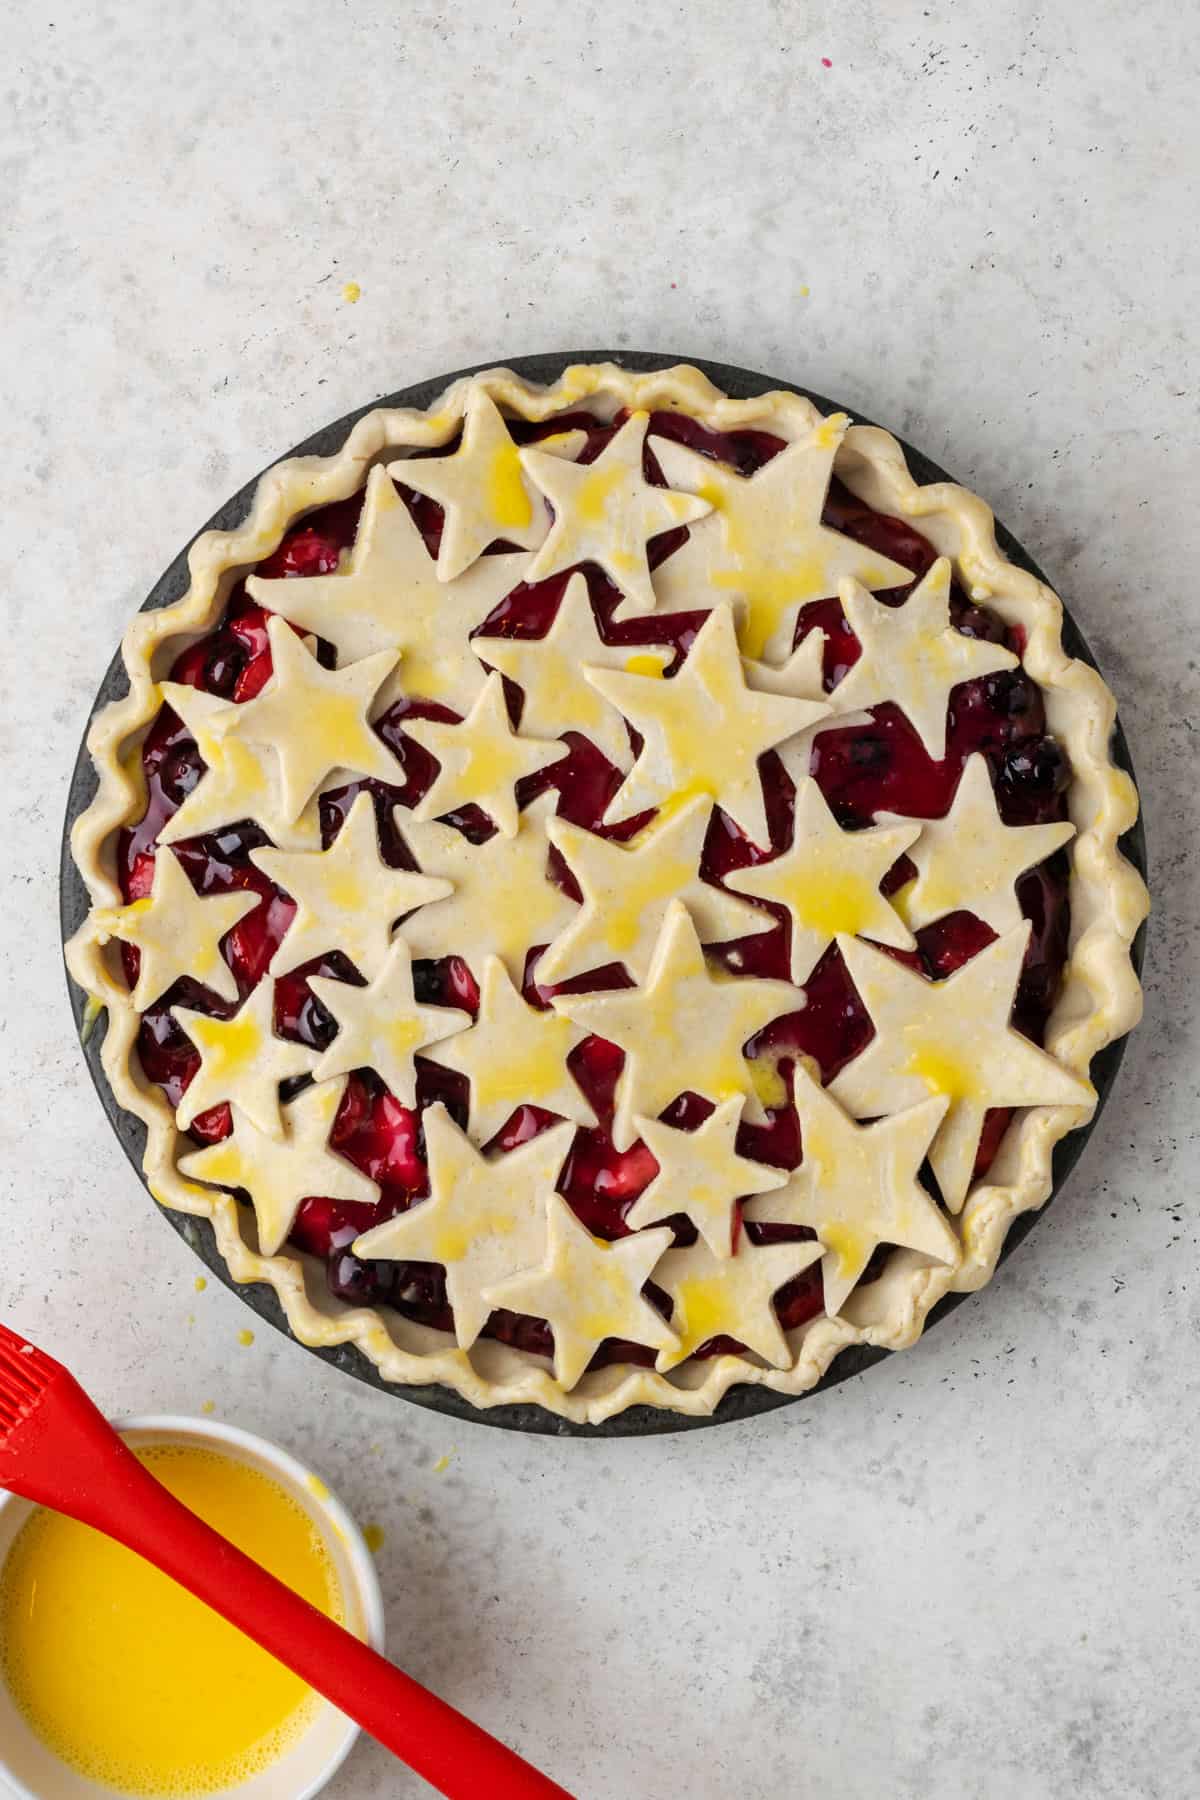 An unbaked strawberry blueberry pie topped with star shapes and brushed with egg wash.